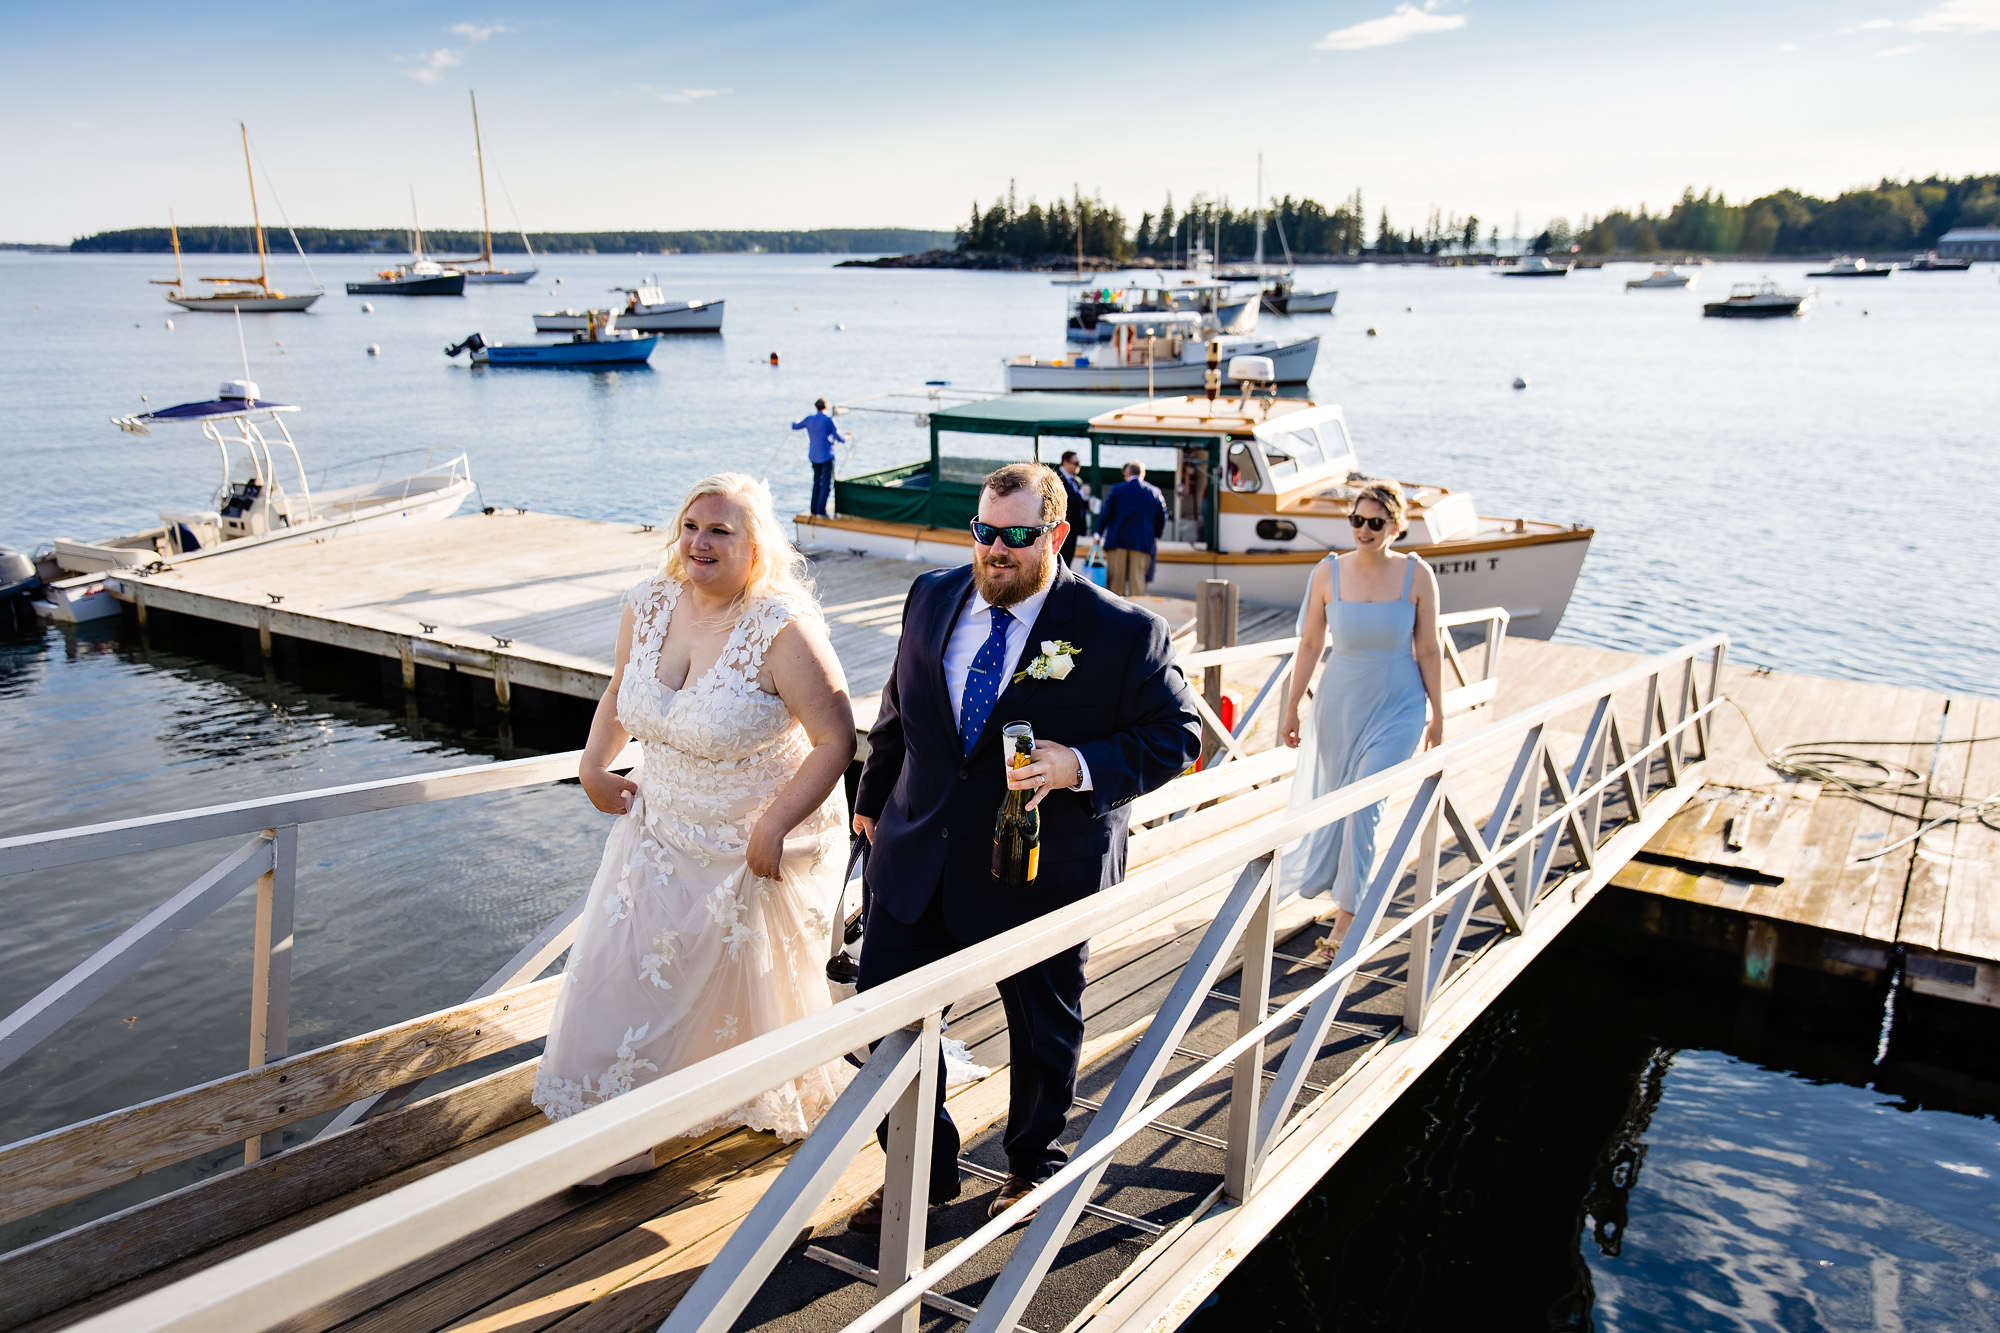 Martha and Wes leave the boat for their intimate wedding reception on Mount Desert Island